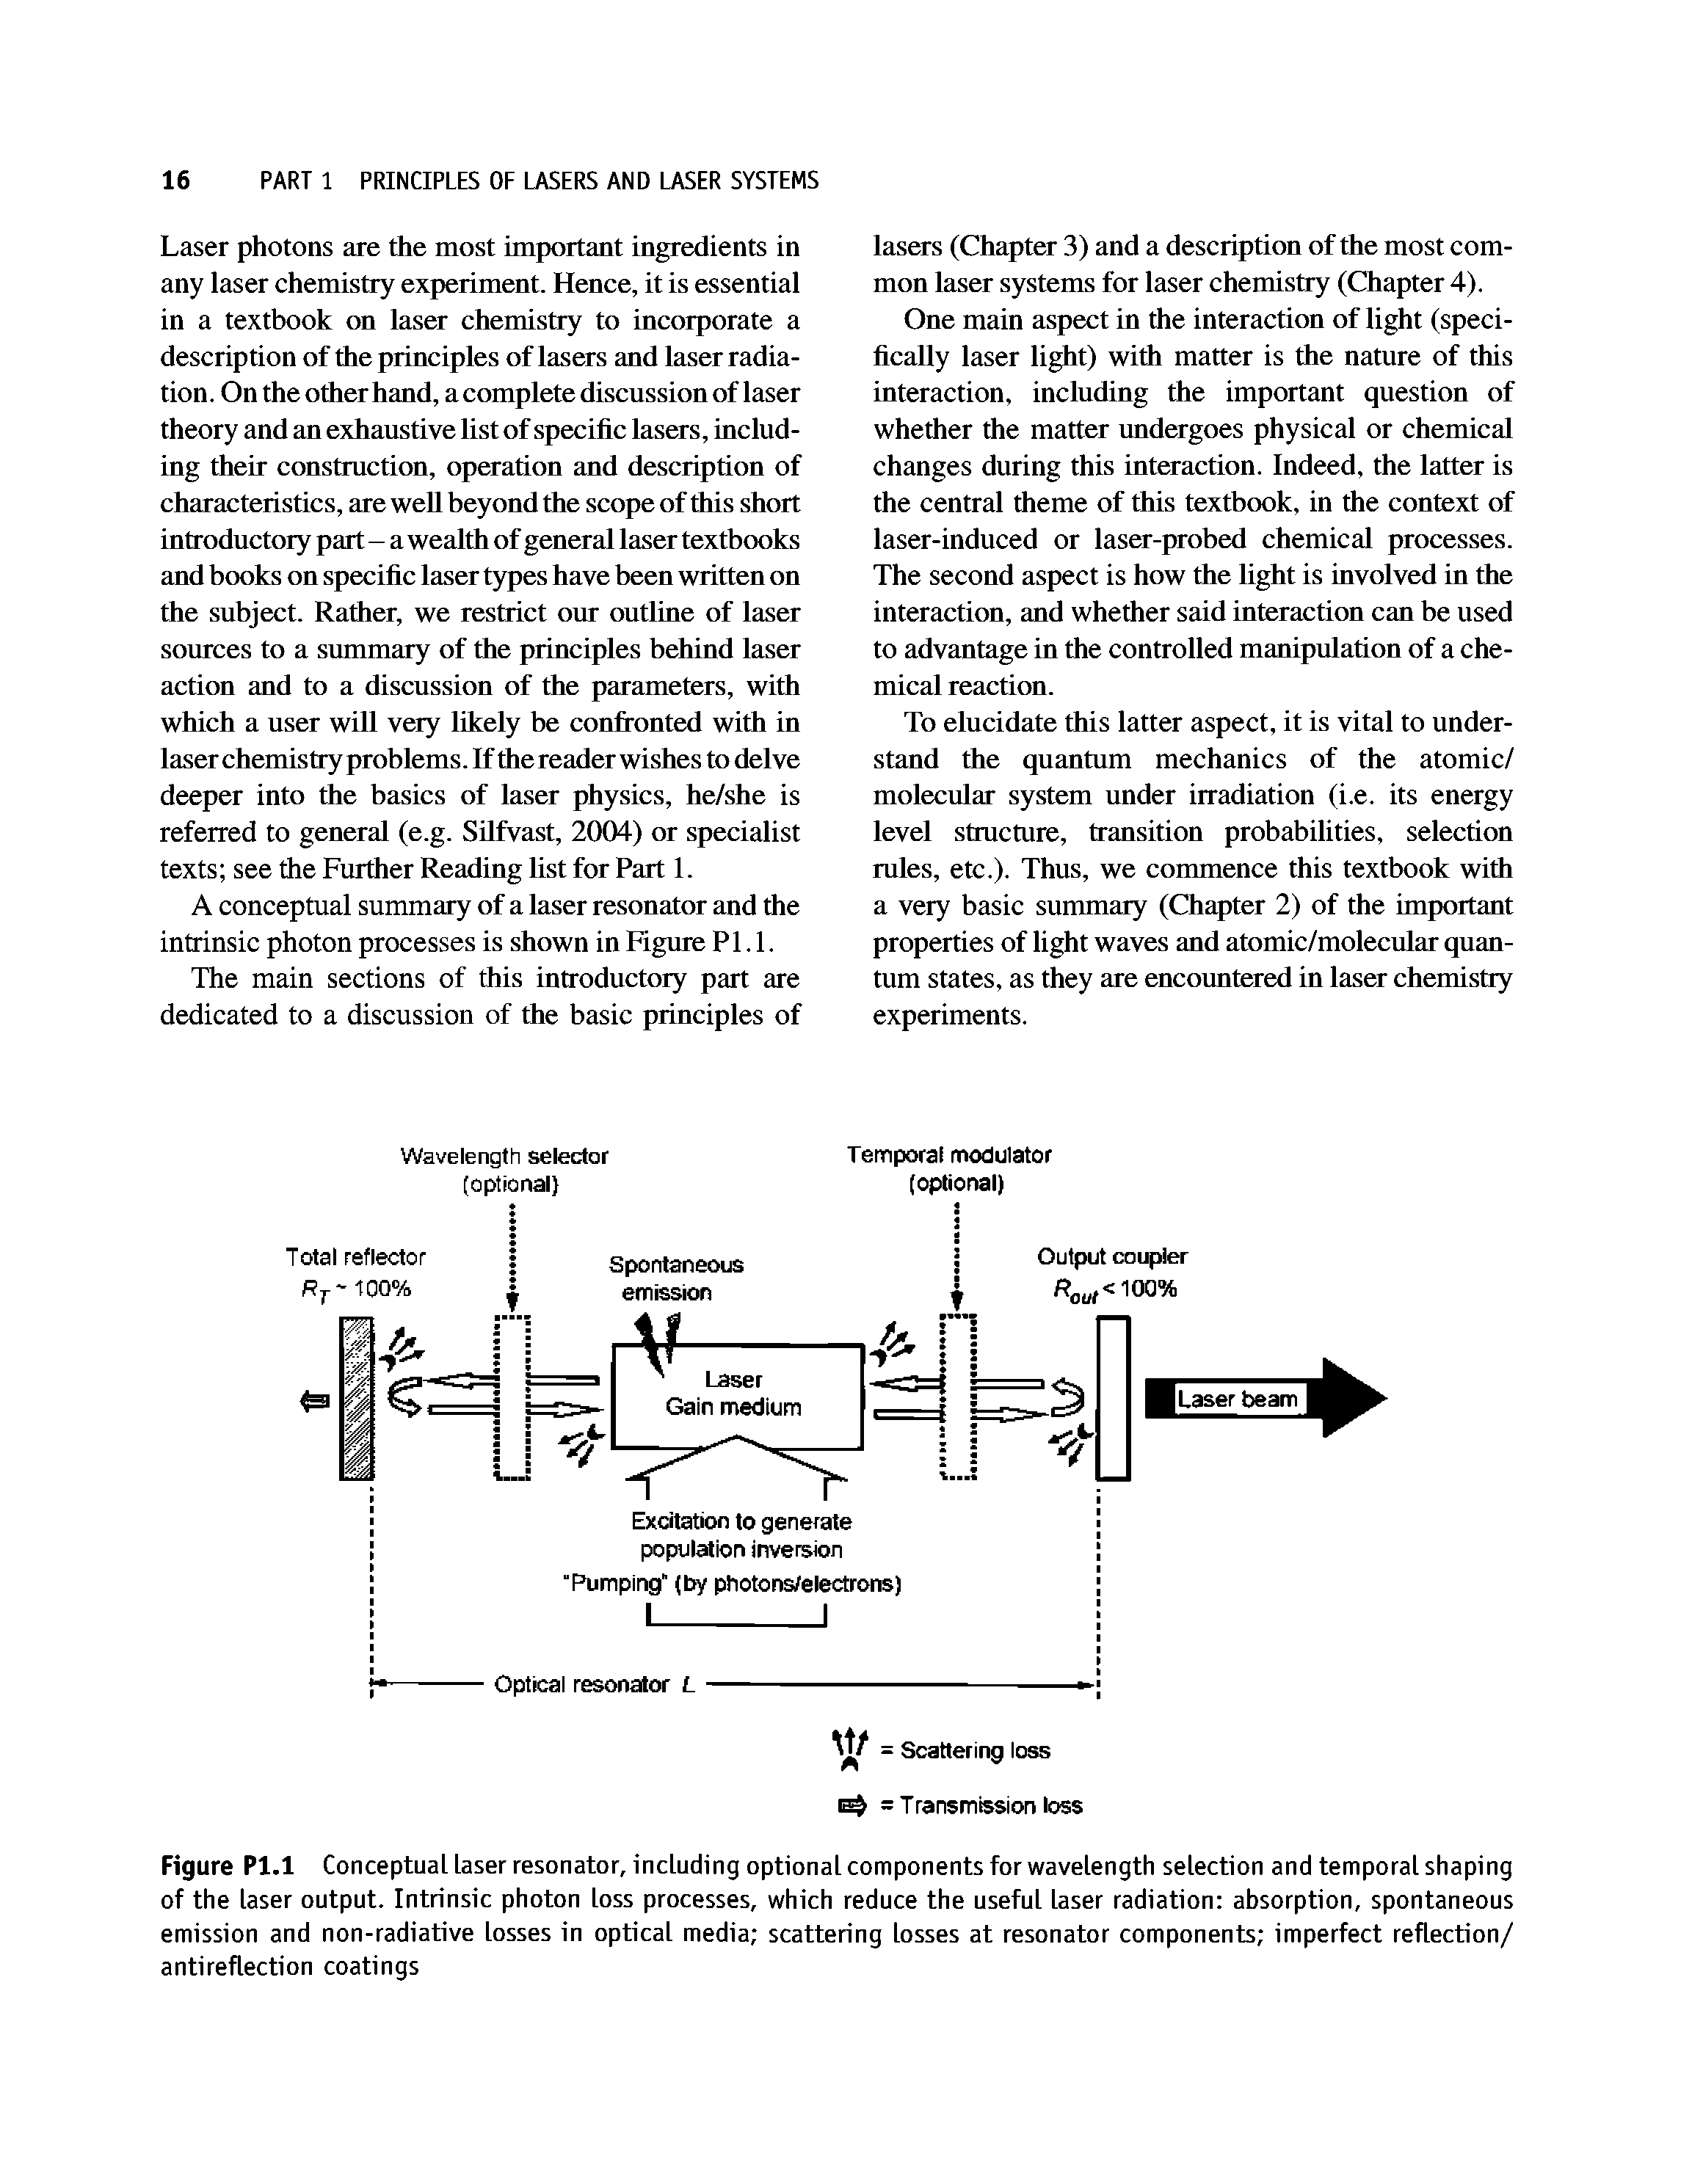 Figure Pl.l Conceptual laser resonator, including optional components for wavelength selection and temporal shaping of the laser output. Intrinsic photon loss processes, which reduce the useful laser radiation absorption, spontaneous emission and non-radiative losses in optical media scattering losses at resonator components imperfect reflection/ antireflection coatings...